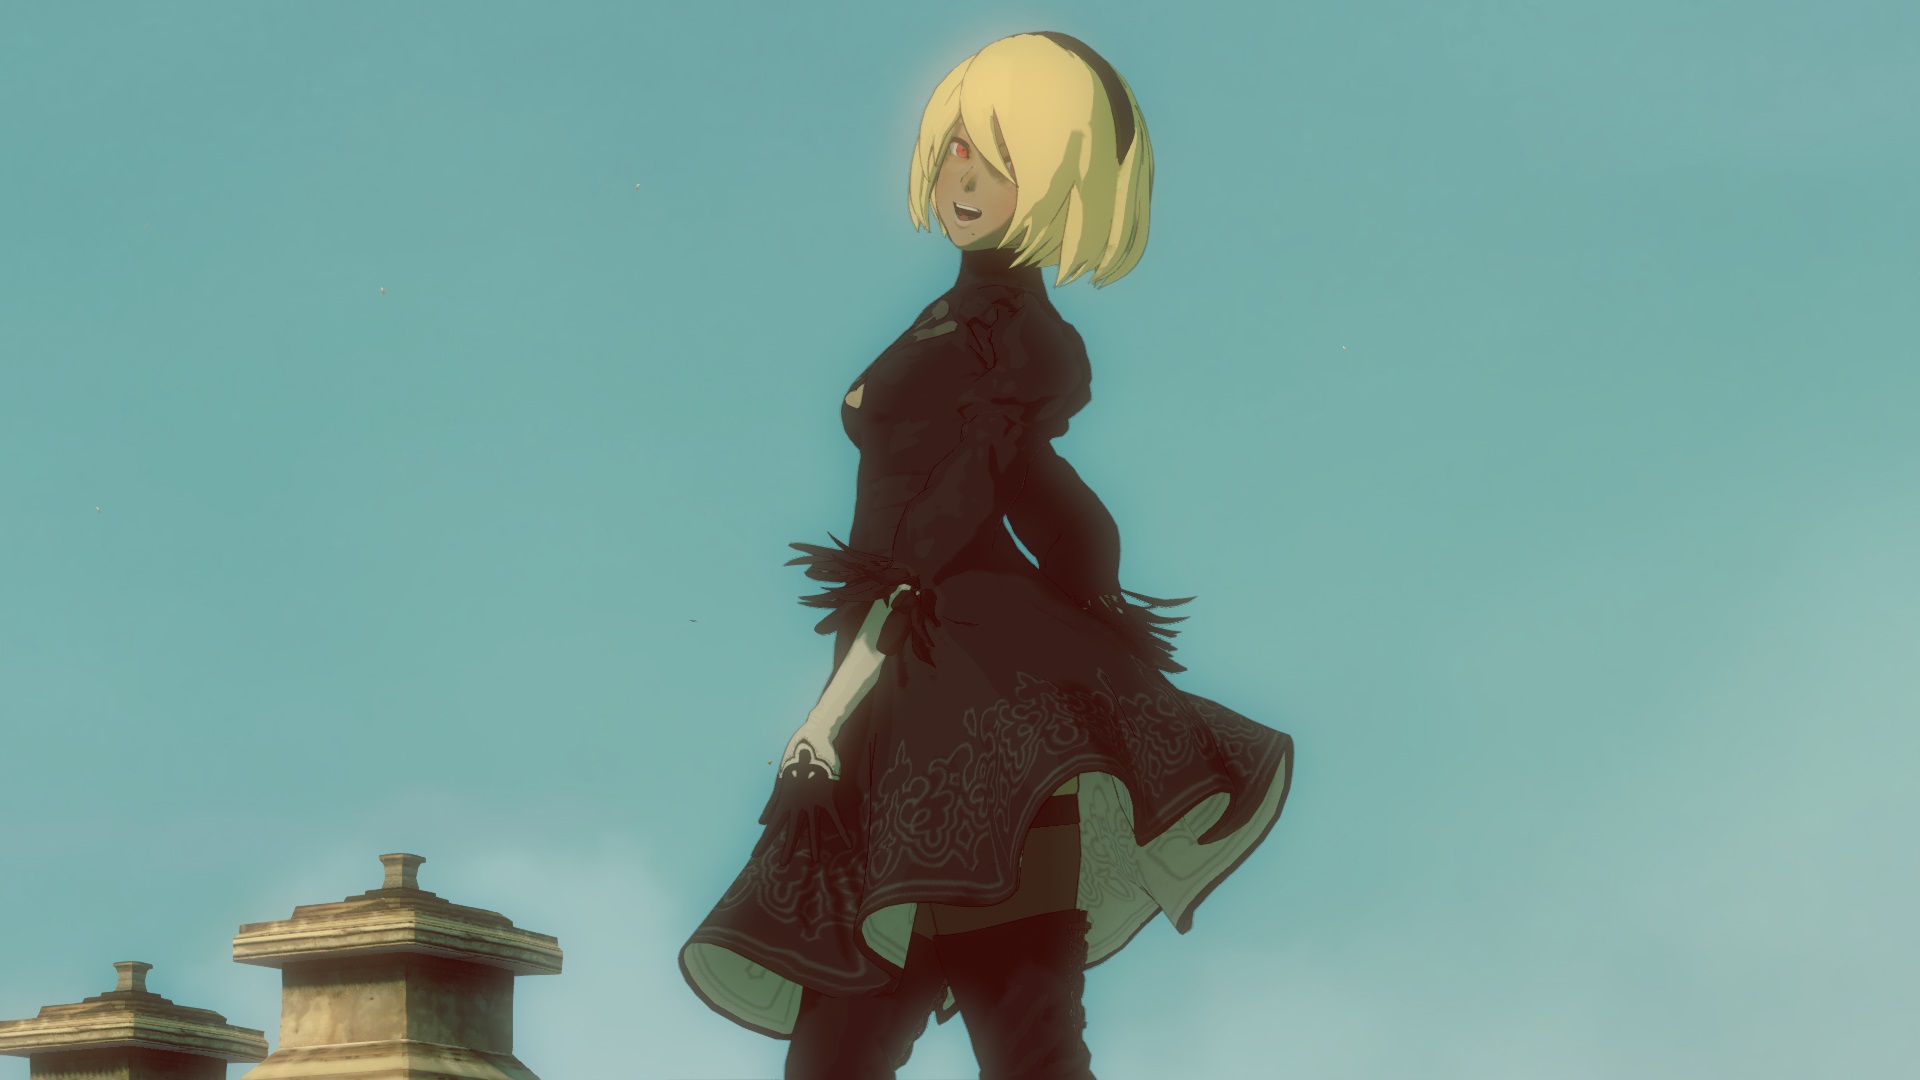 Free NieR: Automata Costume DLC for Gravity Rush 2 Western Launch Set for May 5